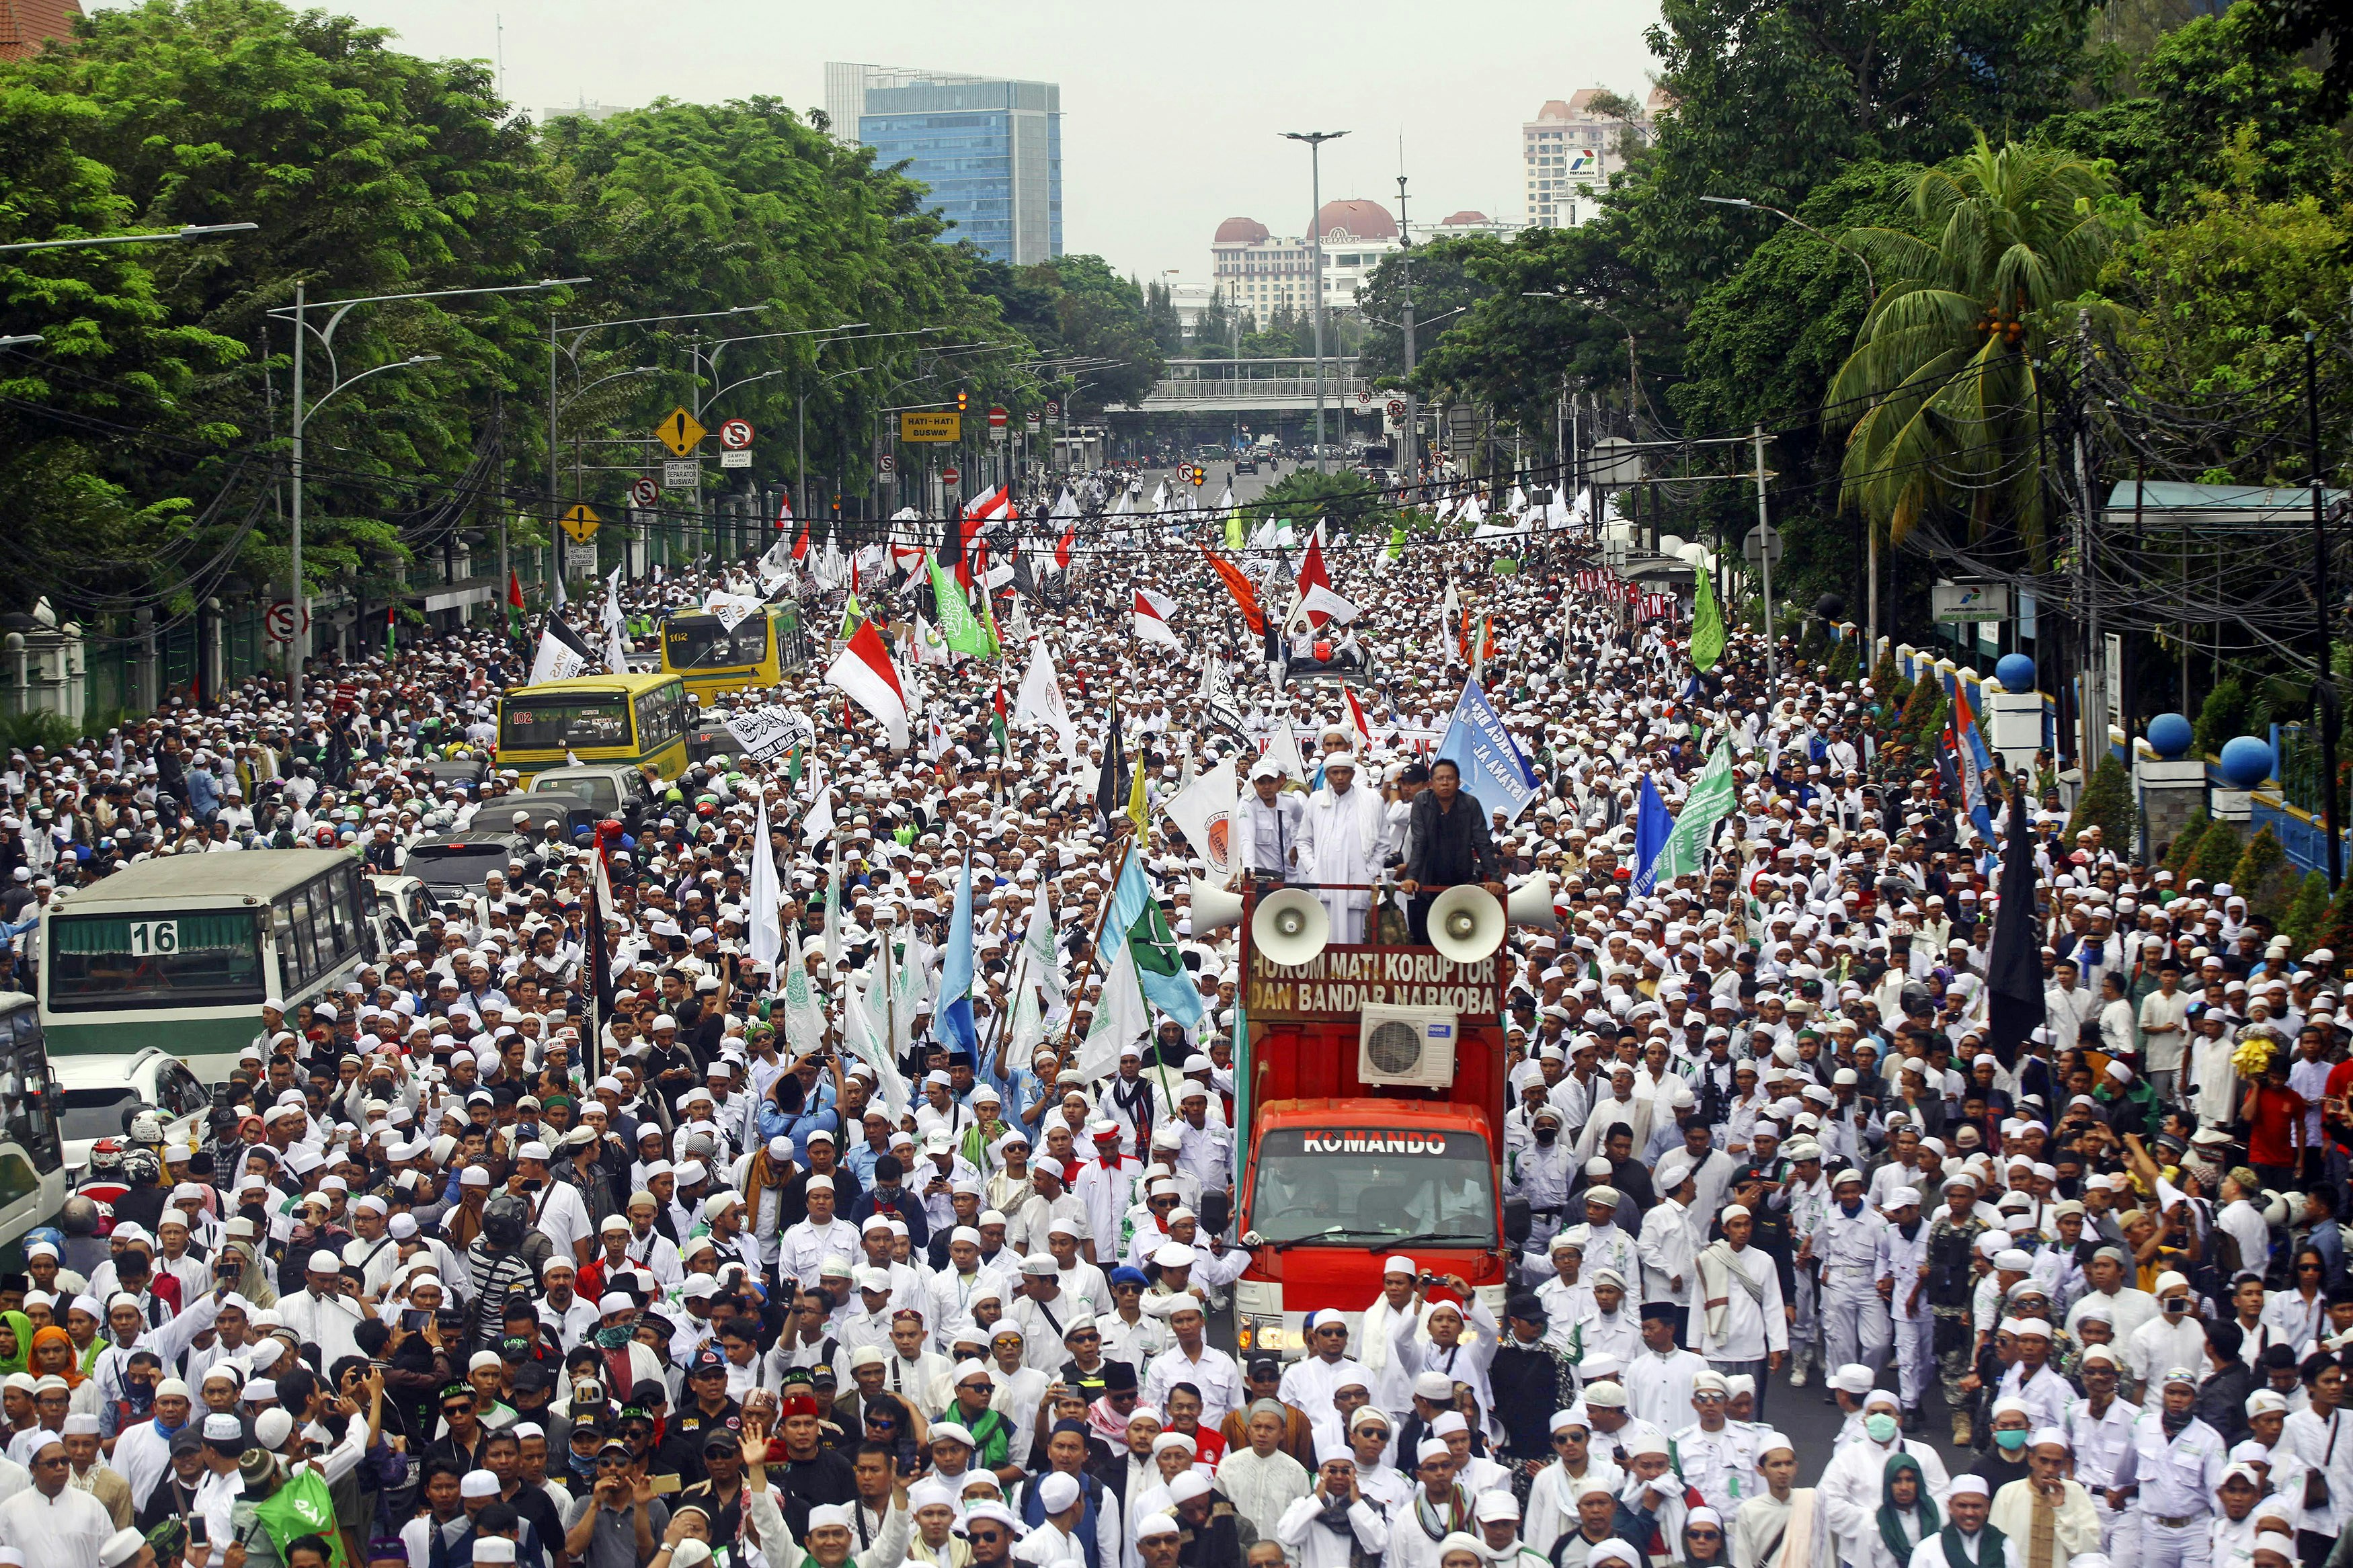 JAKARTA, INDONESIA - OCTOBER 14 : Thousands of the hardline Islamic Defenders Front (FPI) member take part in a protest in Jakarta, Indonesia, on October 14, 2016 to show their disapproval for Governor Basuki Tjahaja Purnama, better known by his nickname "Ahok", after the governors controversial purportedly anti-Islamic speech. Although Jakarta governor Ahok was quoted out of context giving a speech that was interpreted by hardliners as anti-Islamic and blasphemy in Jakarta earlier this month, the Islamic Defenders Front (FPI) group are staging a large protest to show their disdain for the politician.  (Photo by Agoes Rudianto/Anadolu Agency/Getty Images)